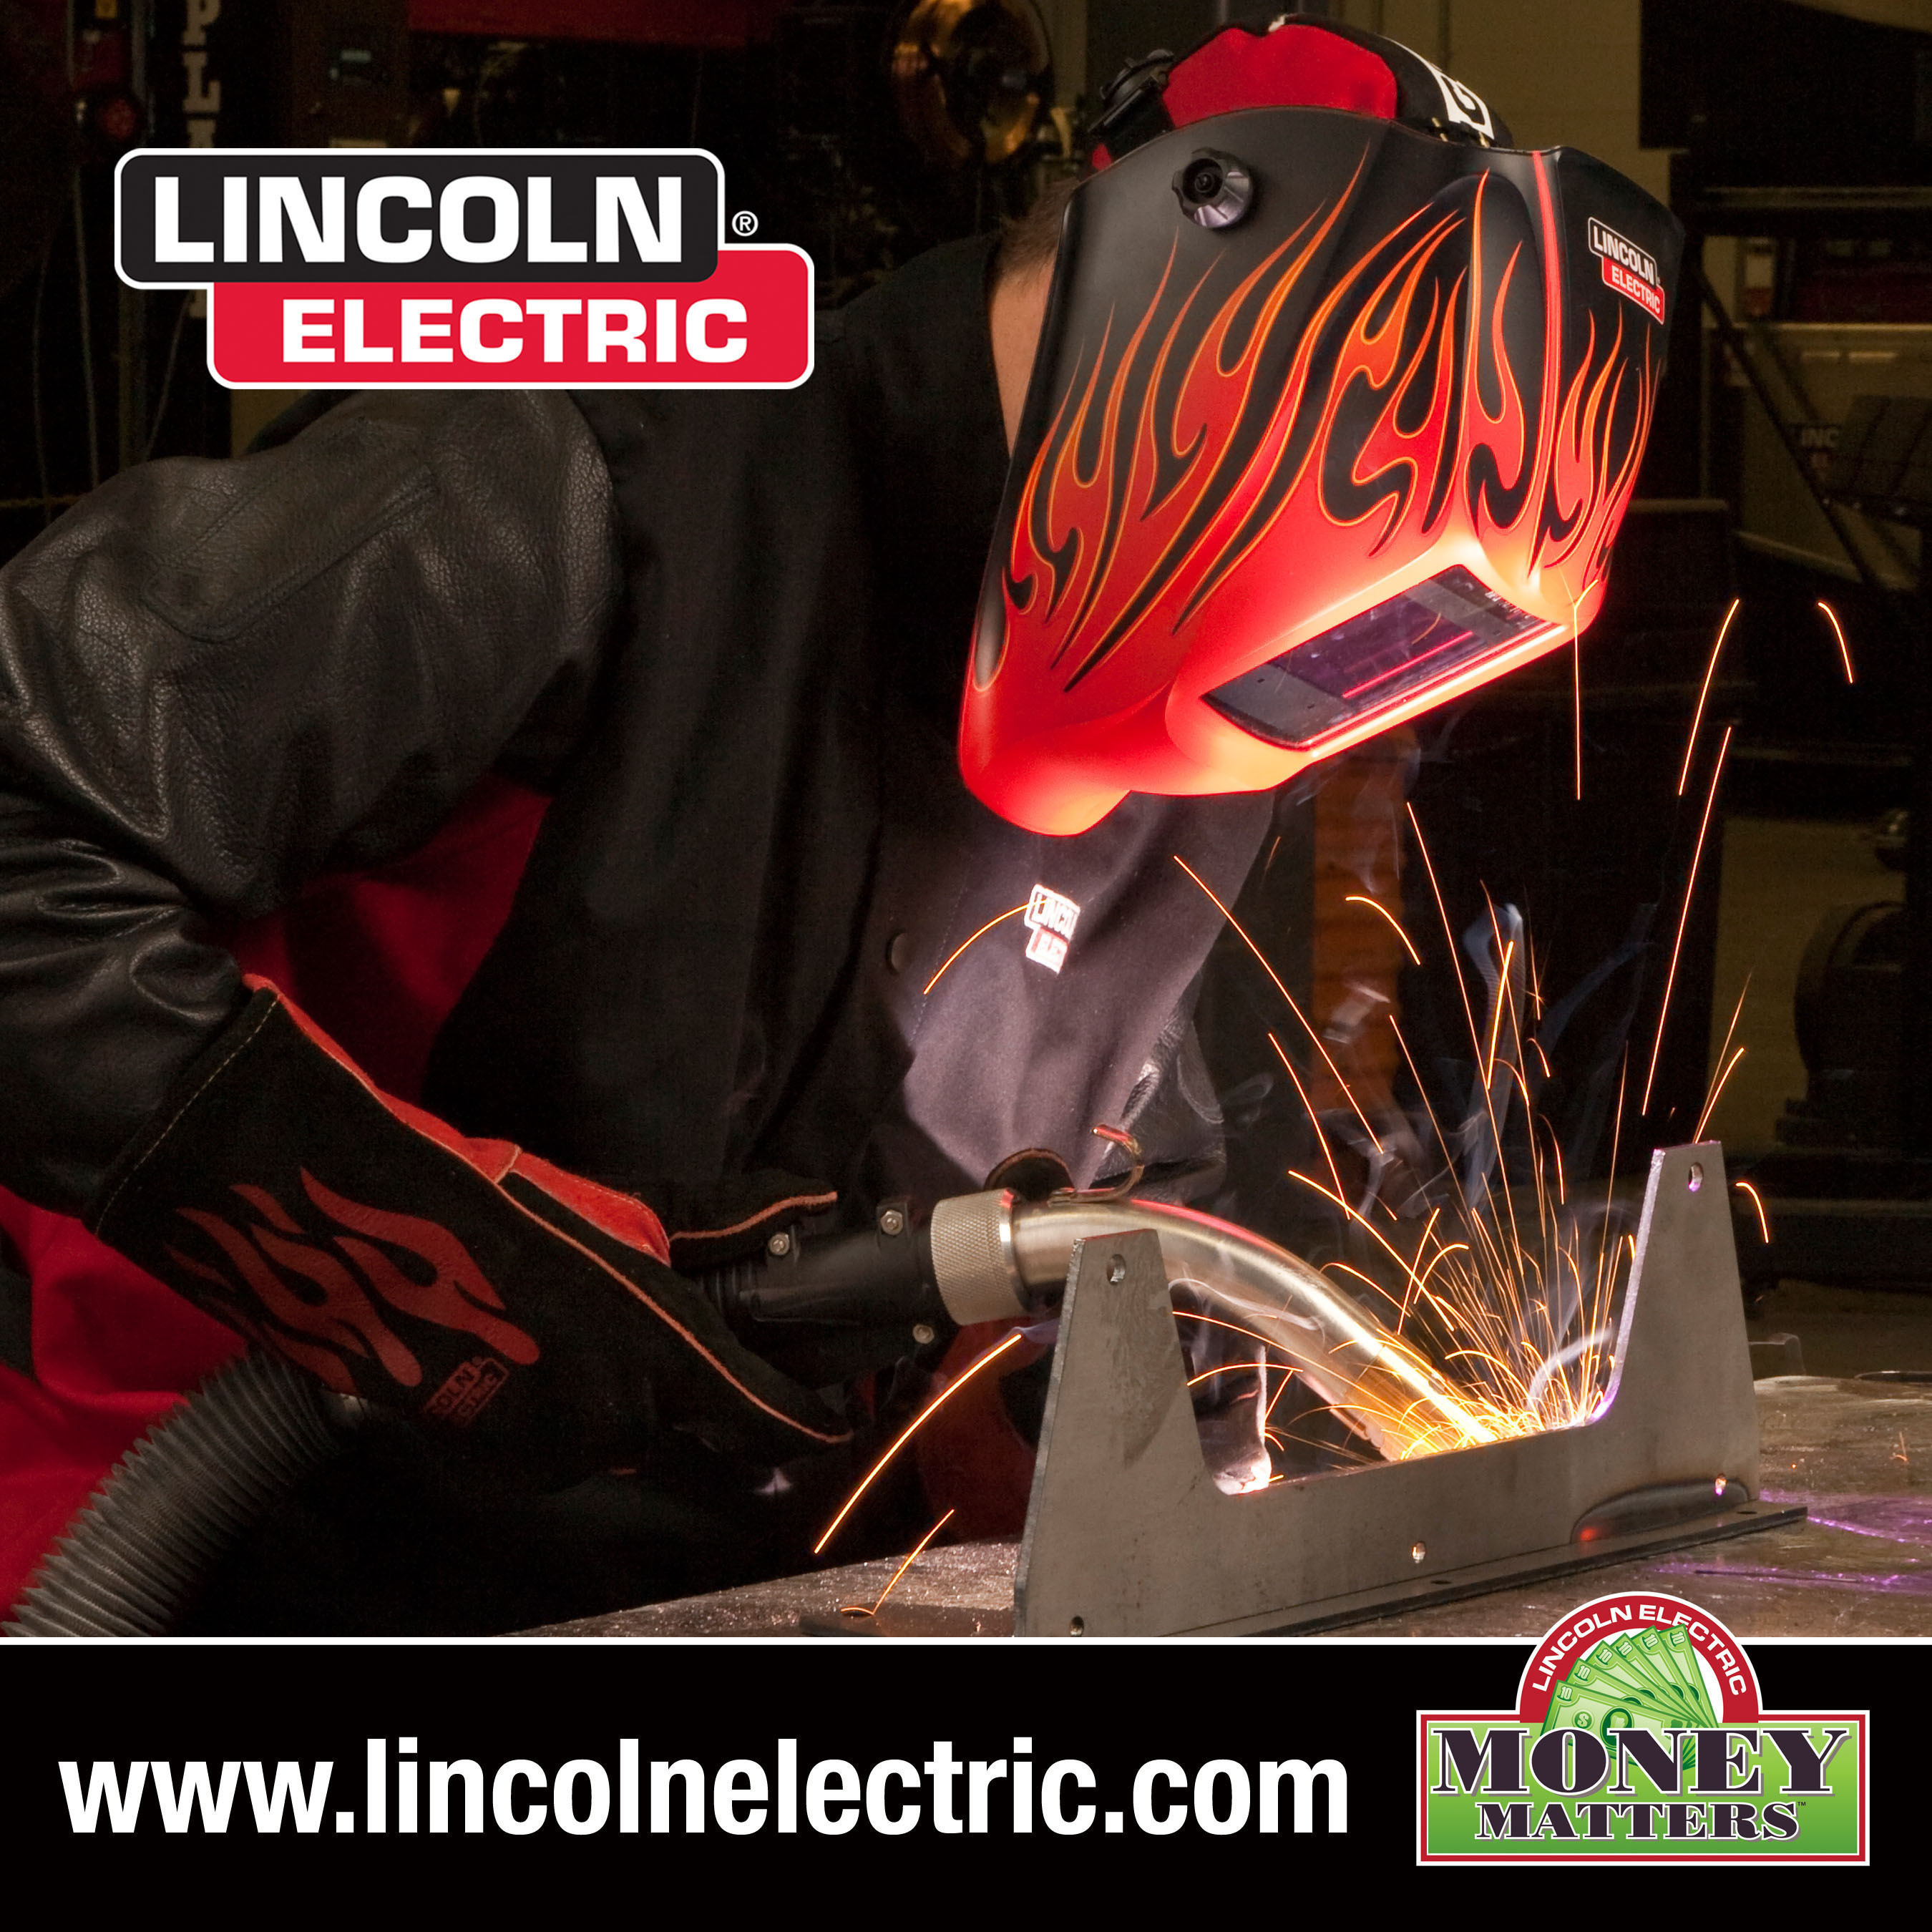 lincoln-electric-gives-customers-their-choice-between-a-cash-rebate-or